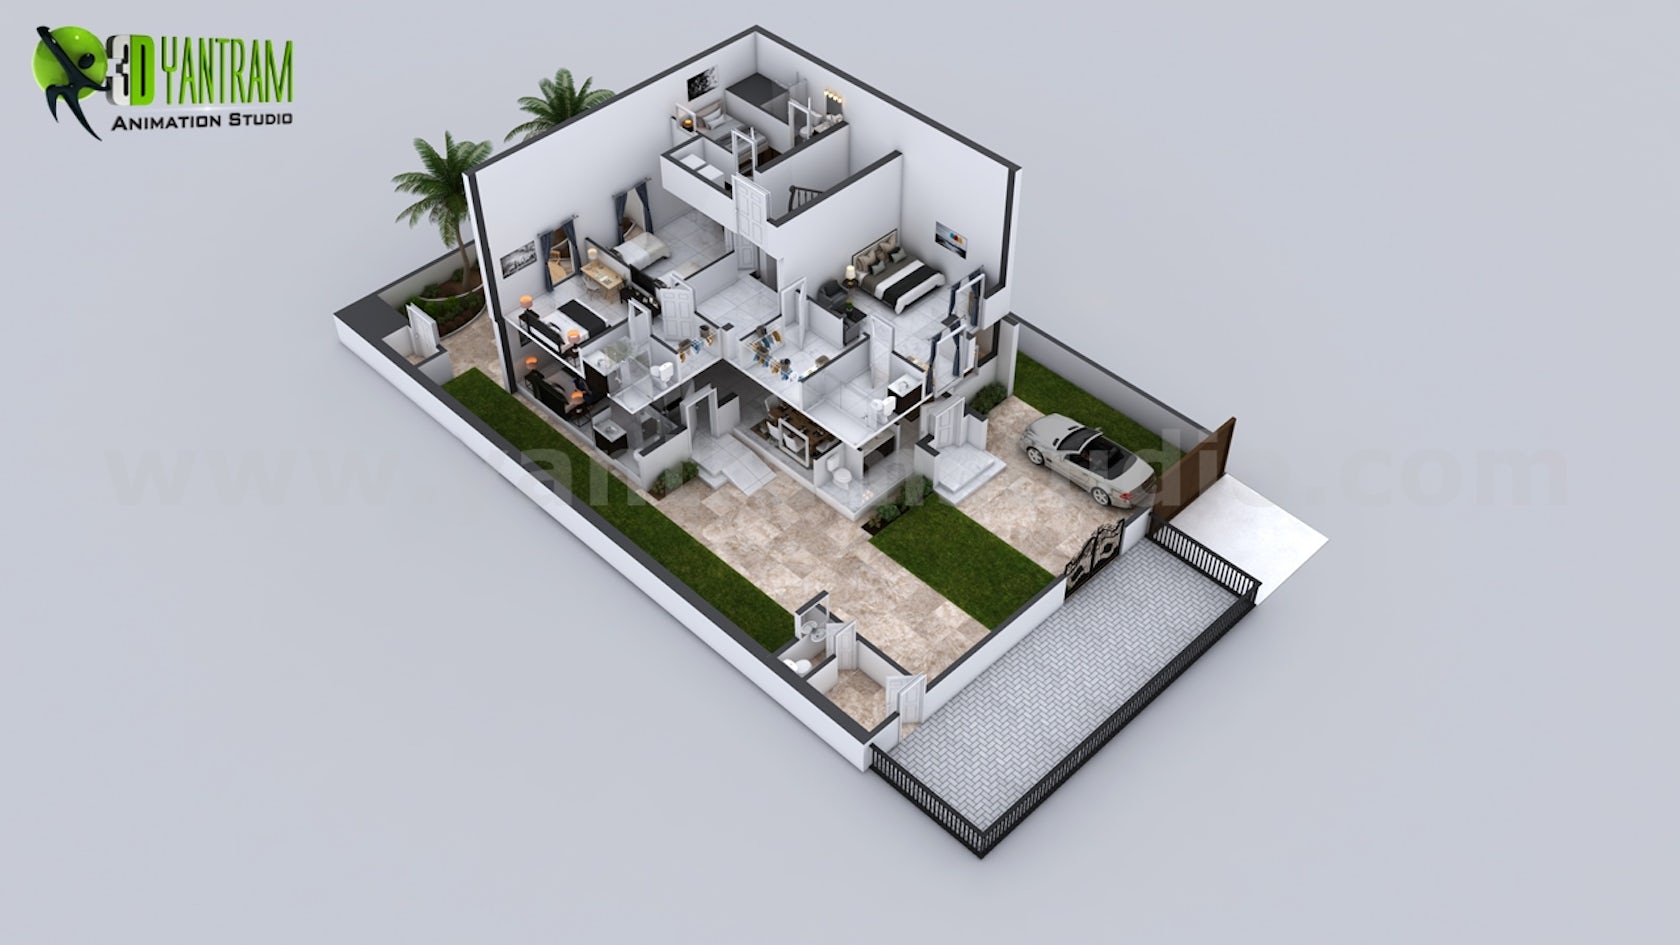 3D Floor Plan of 3 Story House with Cut-Section View by Yantram 3d floor  plan software Rome, Italy by Yantram Floor plan Designer - Architizer